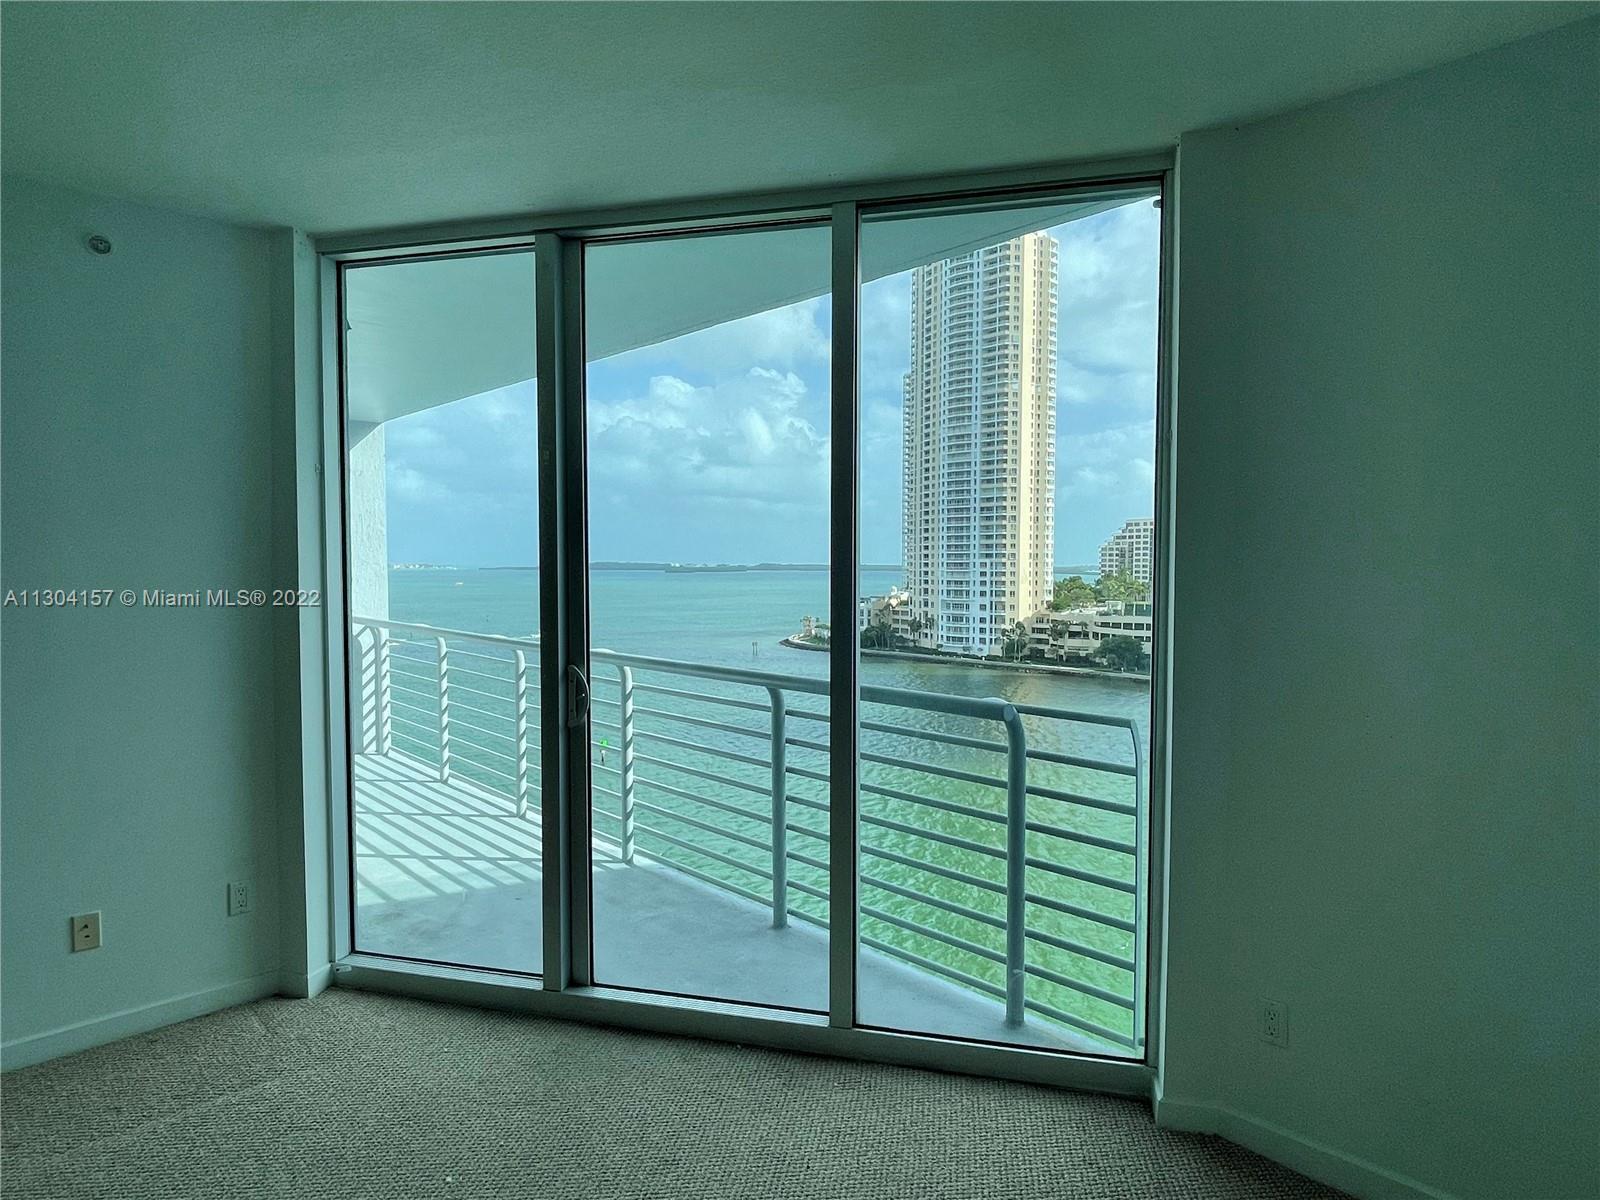 Fabulous Biscayne Bay views from this ample 1 bedroom / 1 bath unit. Condo comes with Italian kitche